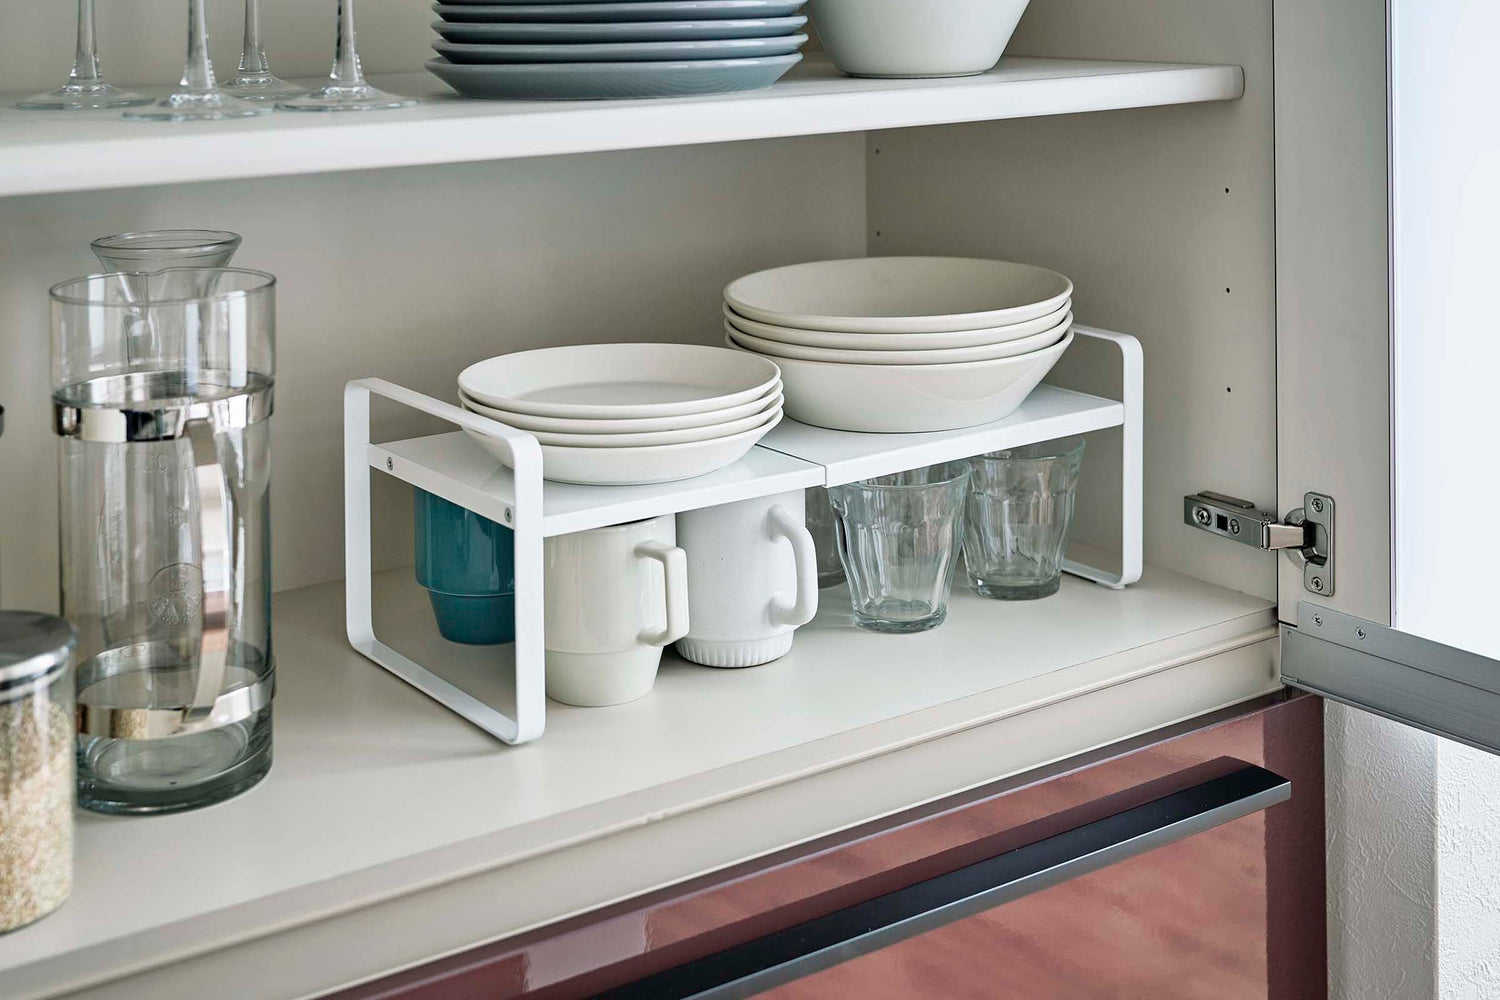 View 5 - White Expandable Countertop Organizer expanded holding plates in kitchen cabinet by Yamazaki Home.